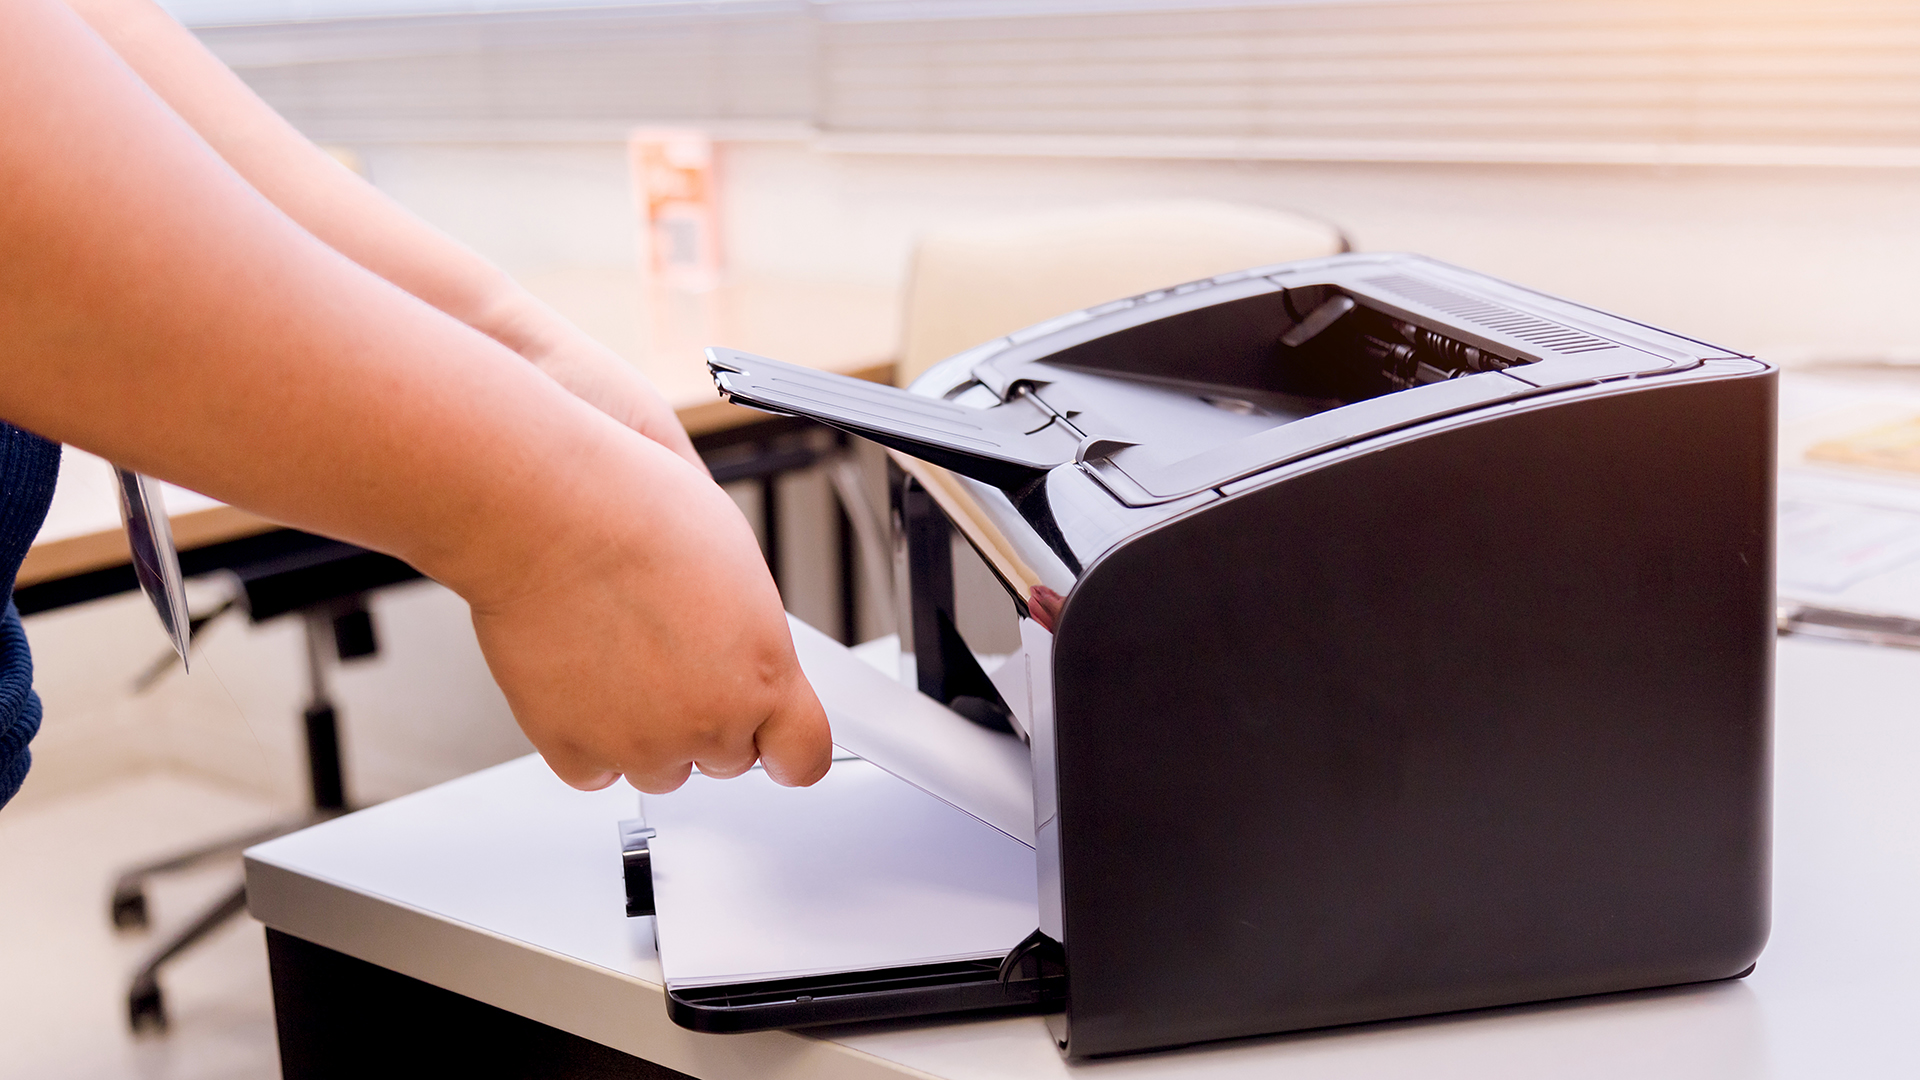 Five myths about compact printers: We're here to debunk them